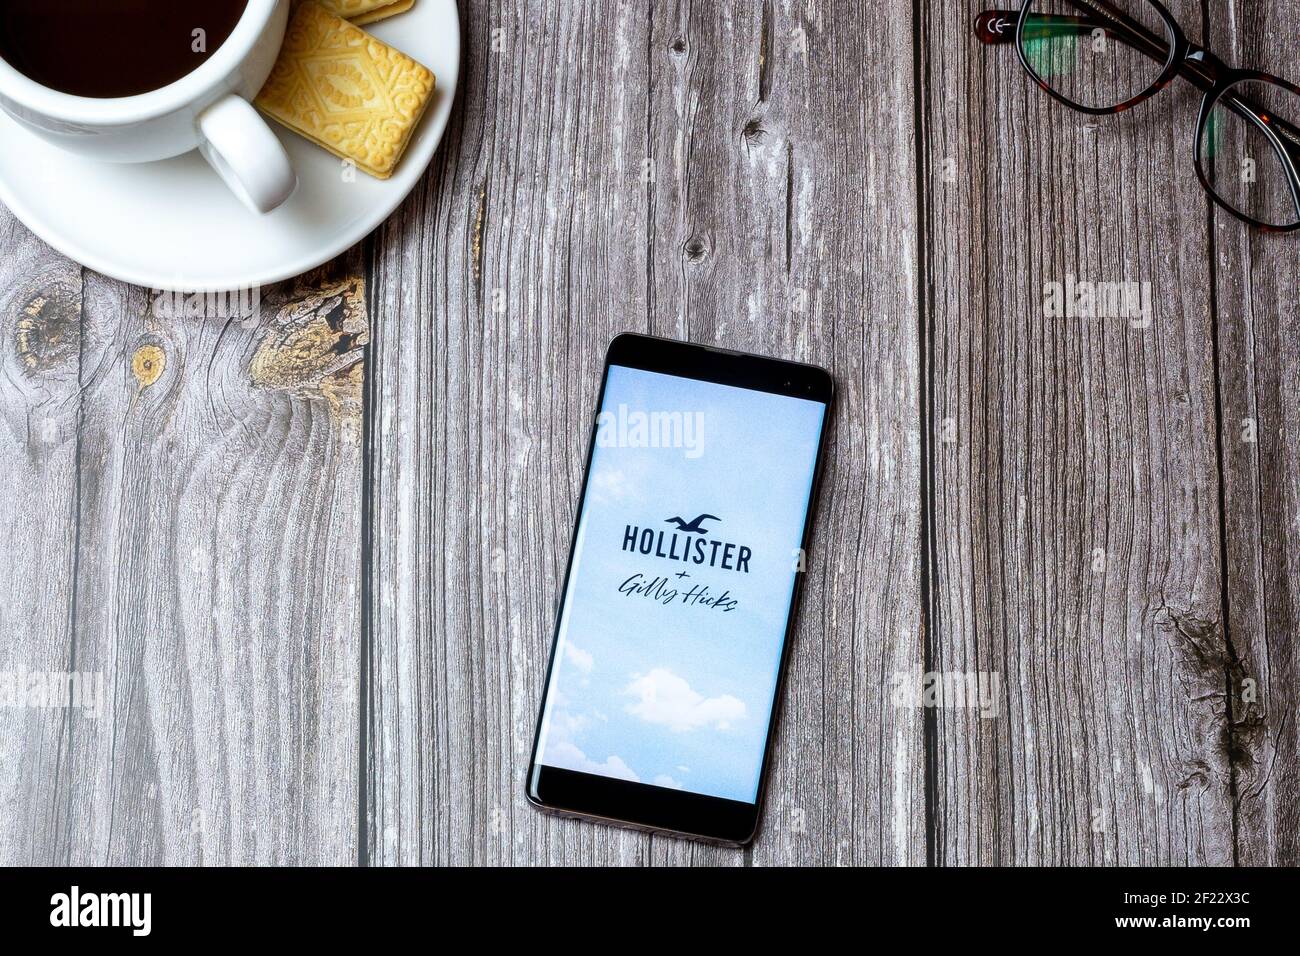 A mobile phone or cell phone on a wooden table with the Hollister app open next to a coffee and glasses Stock Photo